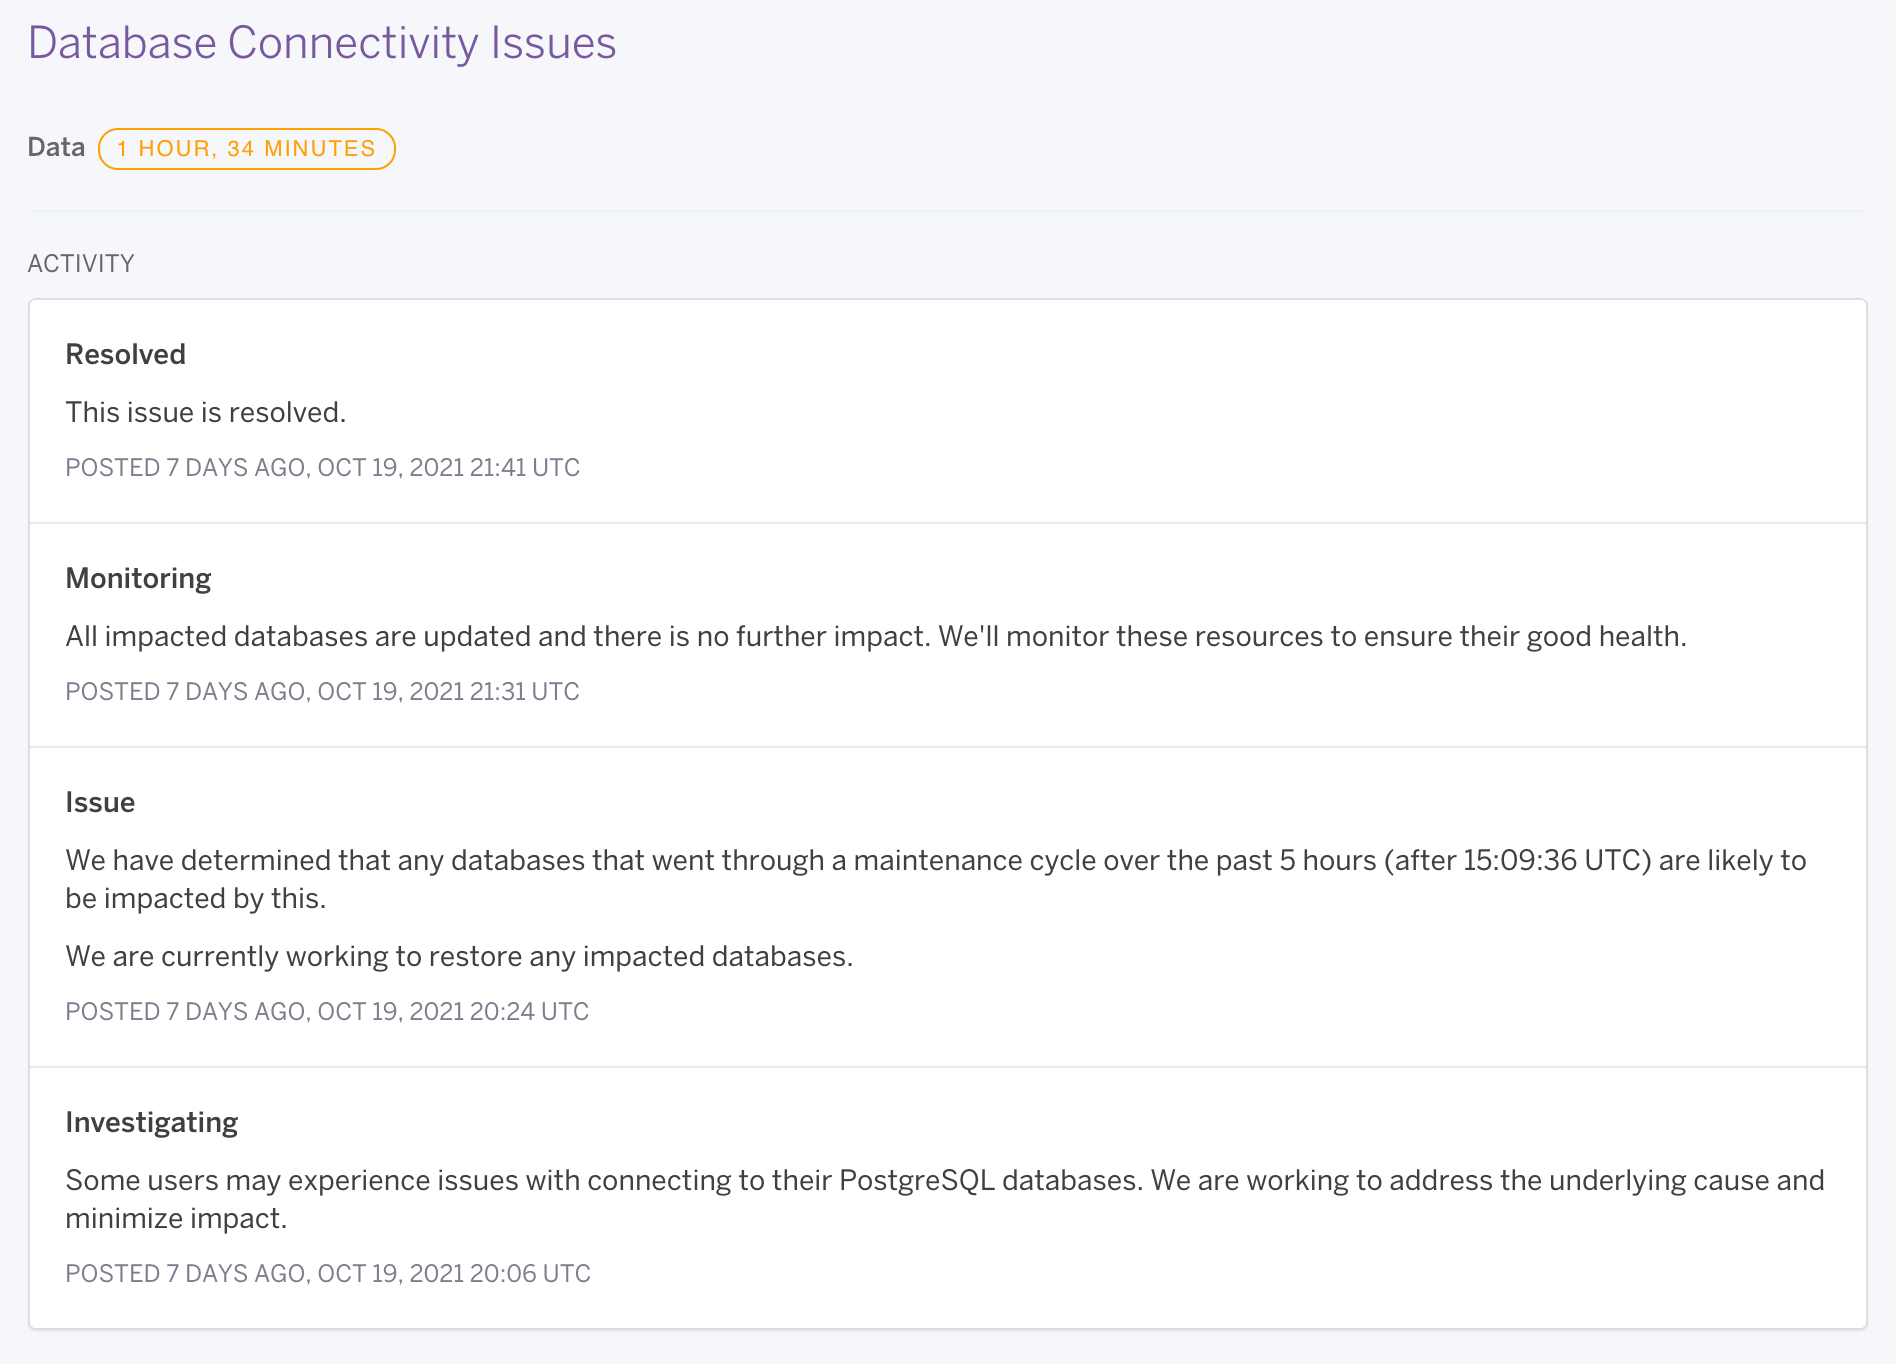 Heroku doing a fantastic job of providing all the context they have (source)